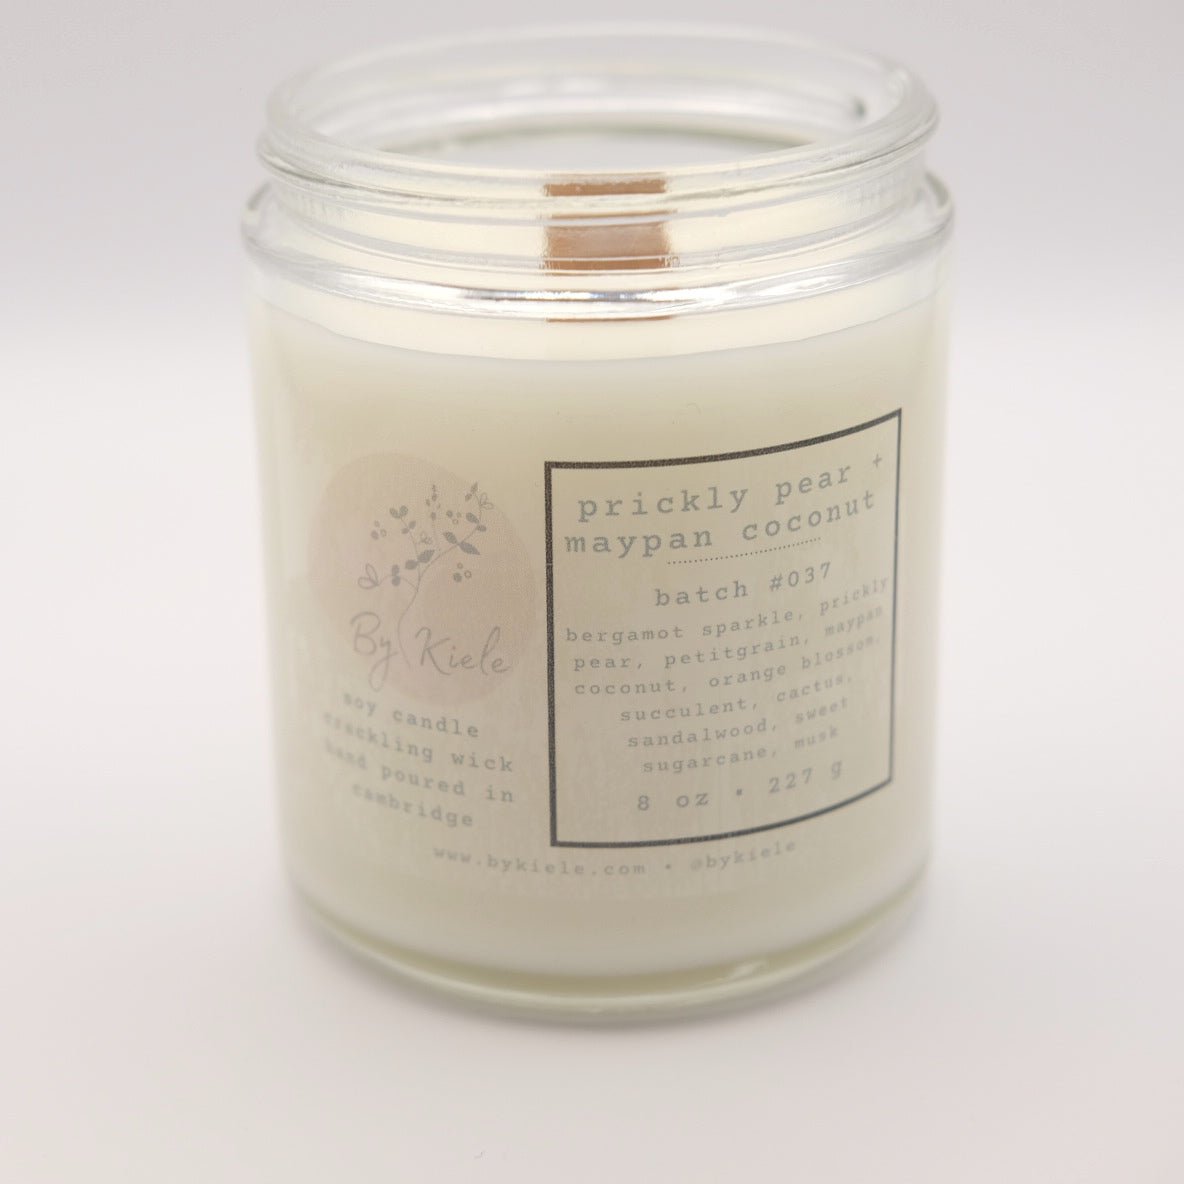 prickly pear + maypan coconut candle - prickly pear + maypan coconut candle - by kiele